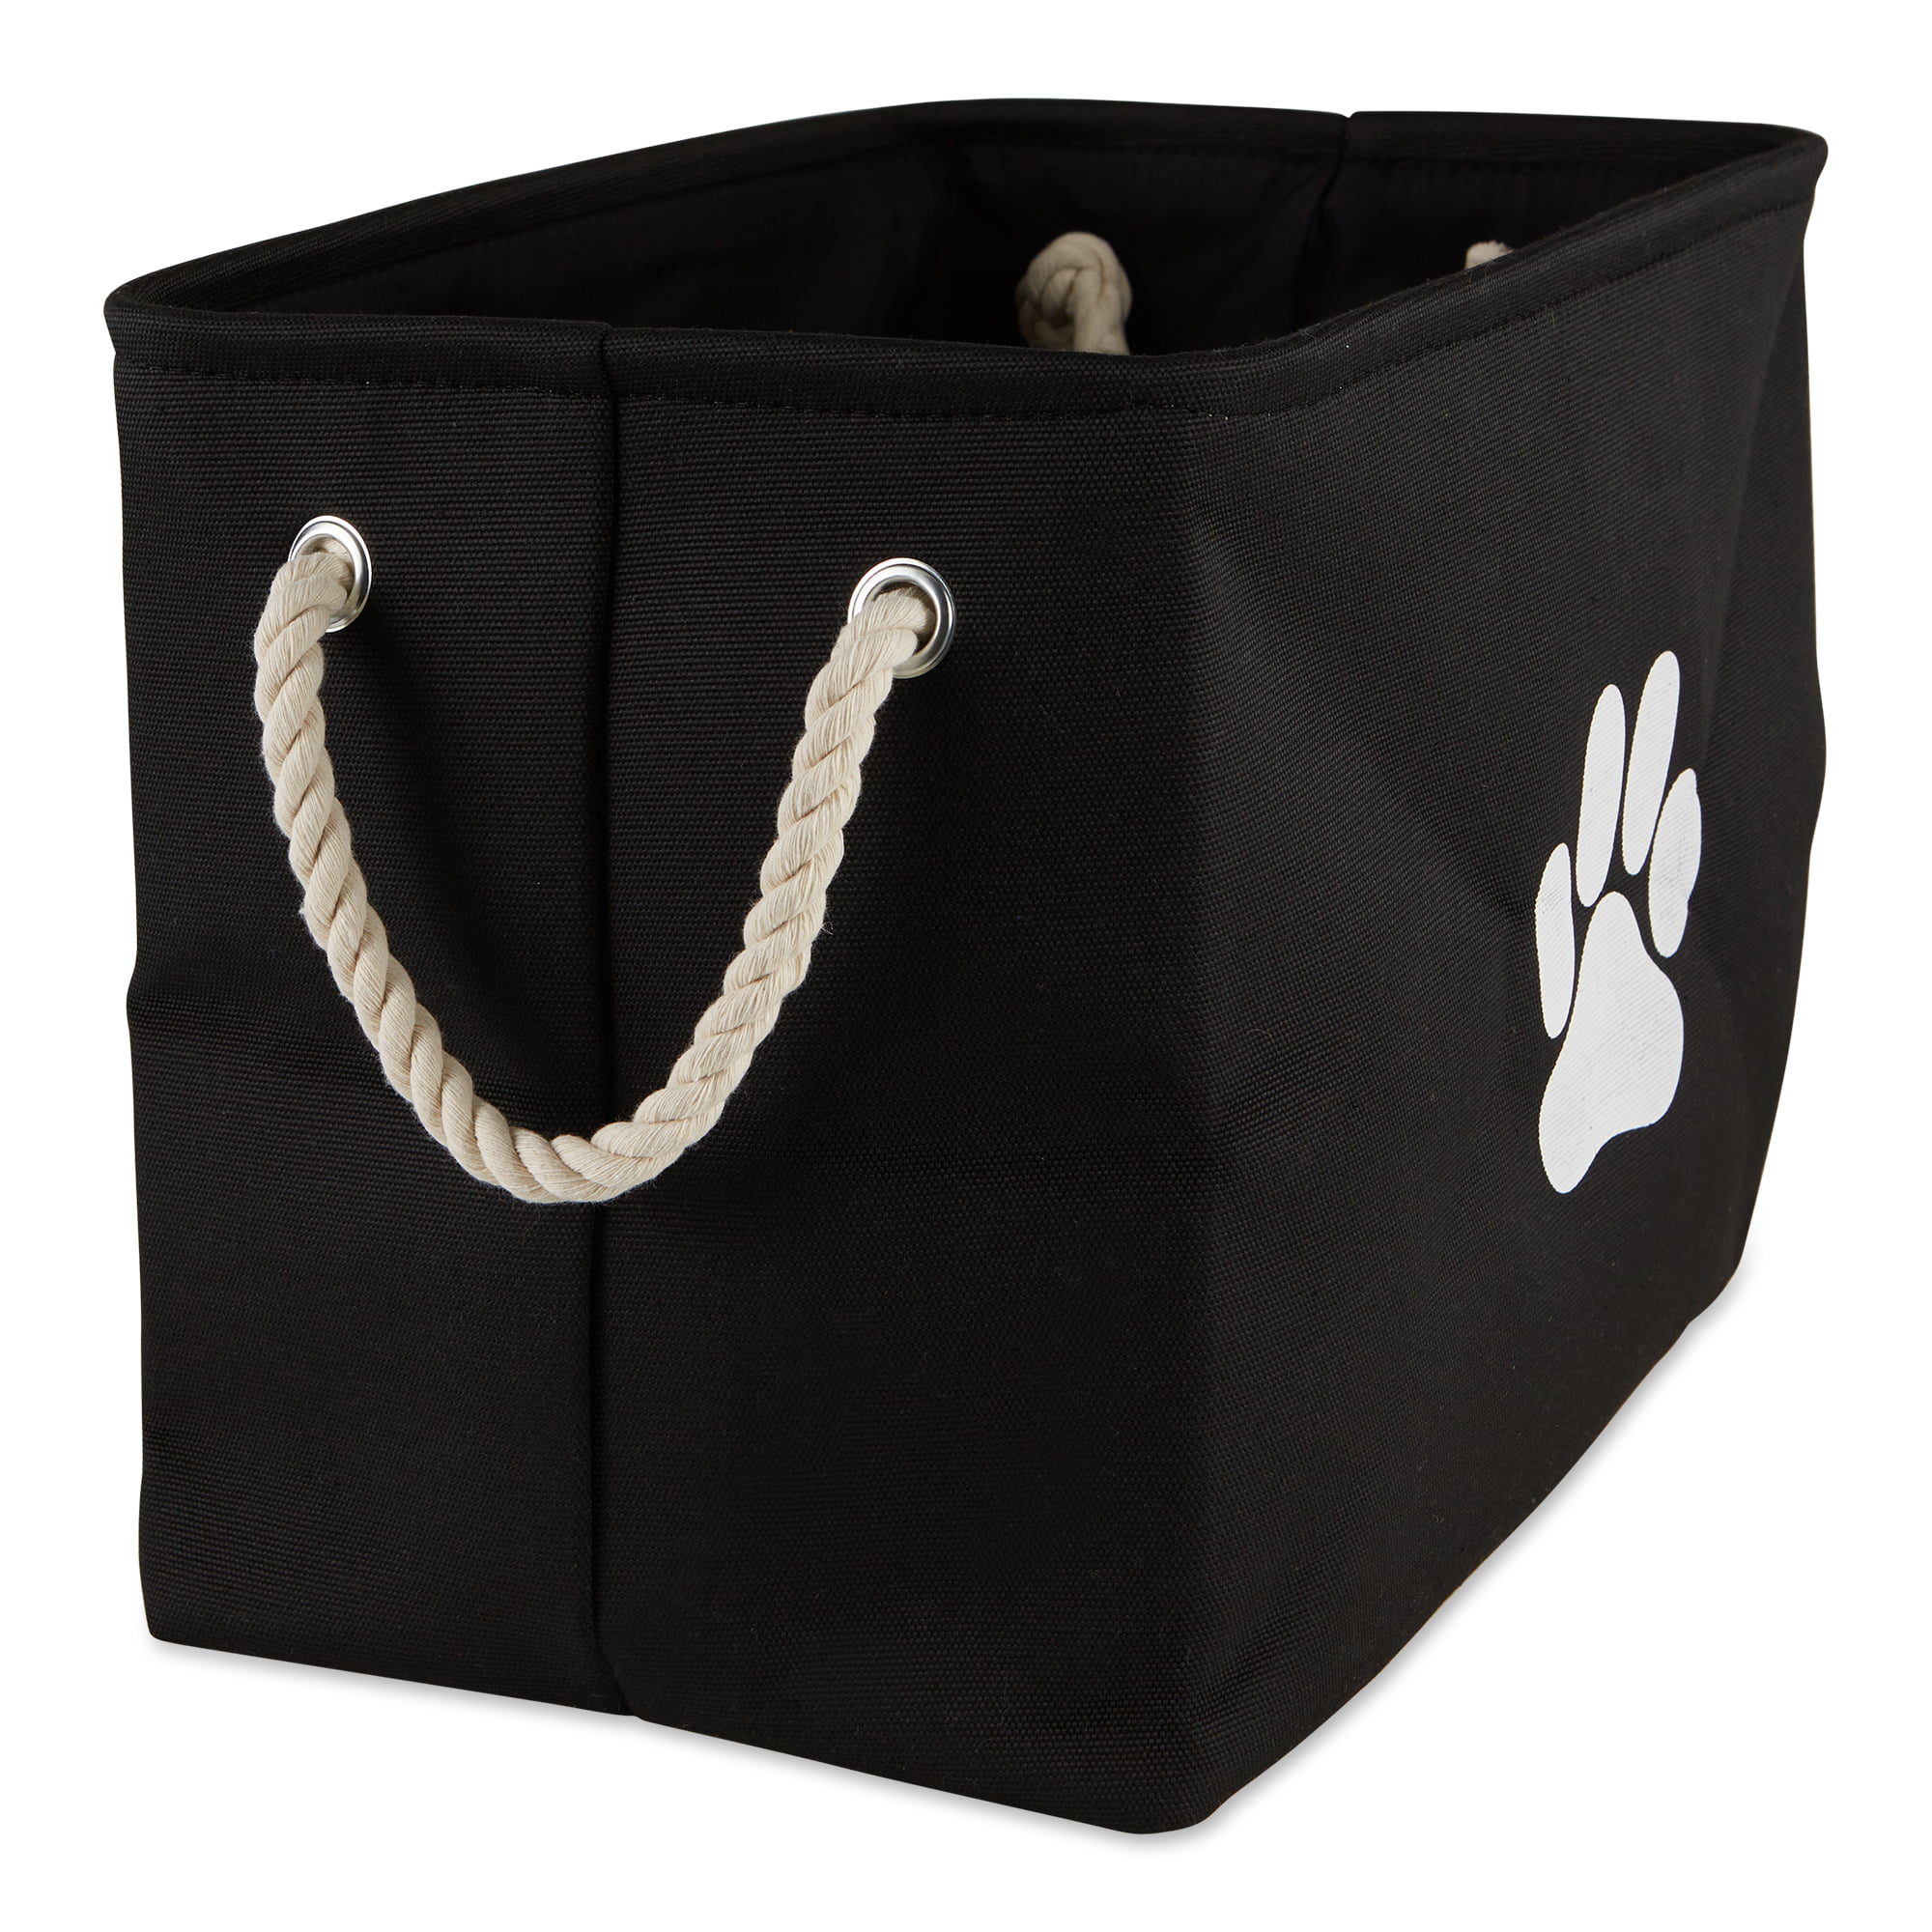 Picture of Design Imports CAMZ12485 Paw Rectangle Polyester Pet Bin, Black - Small